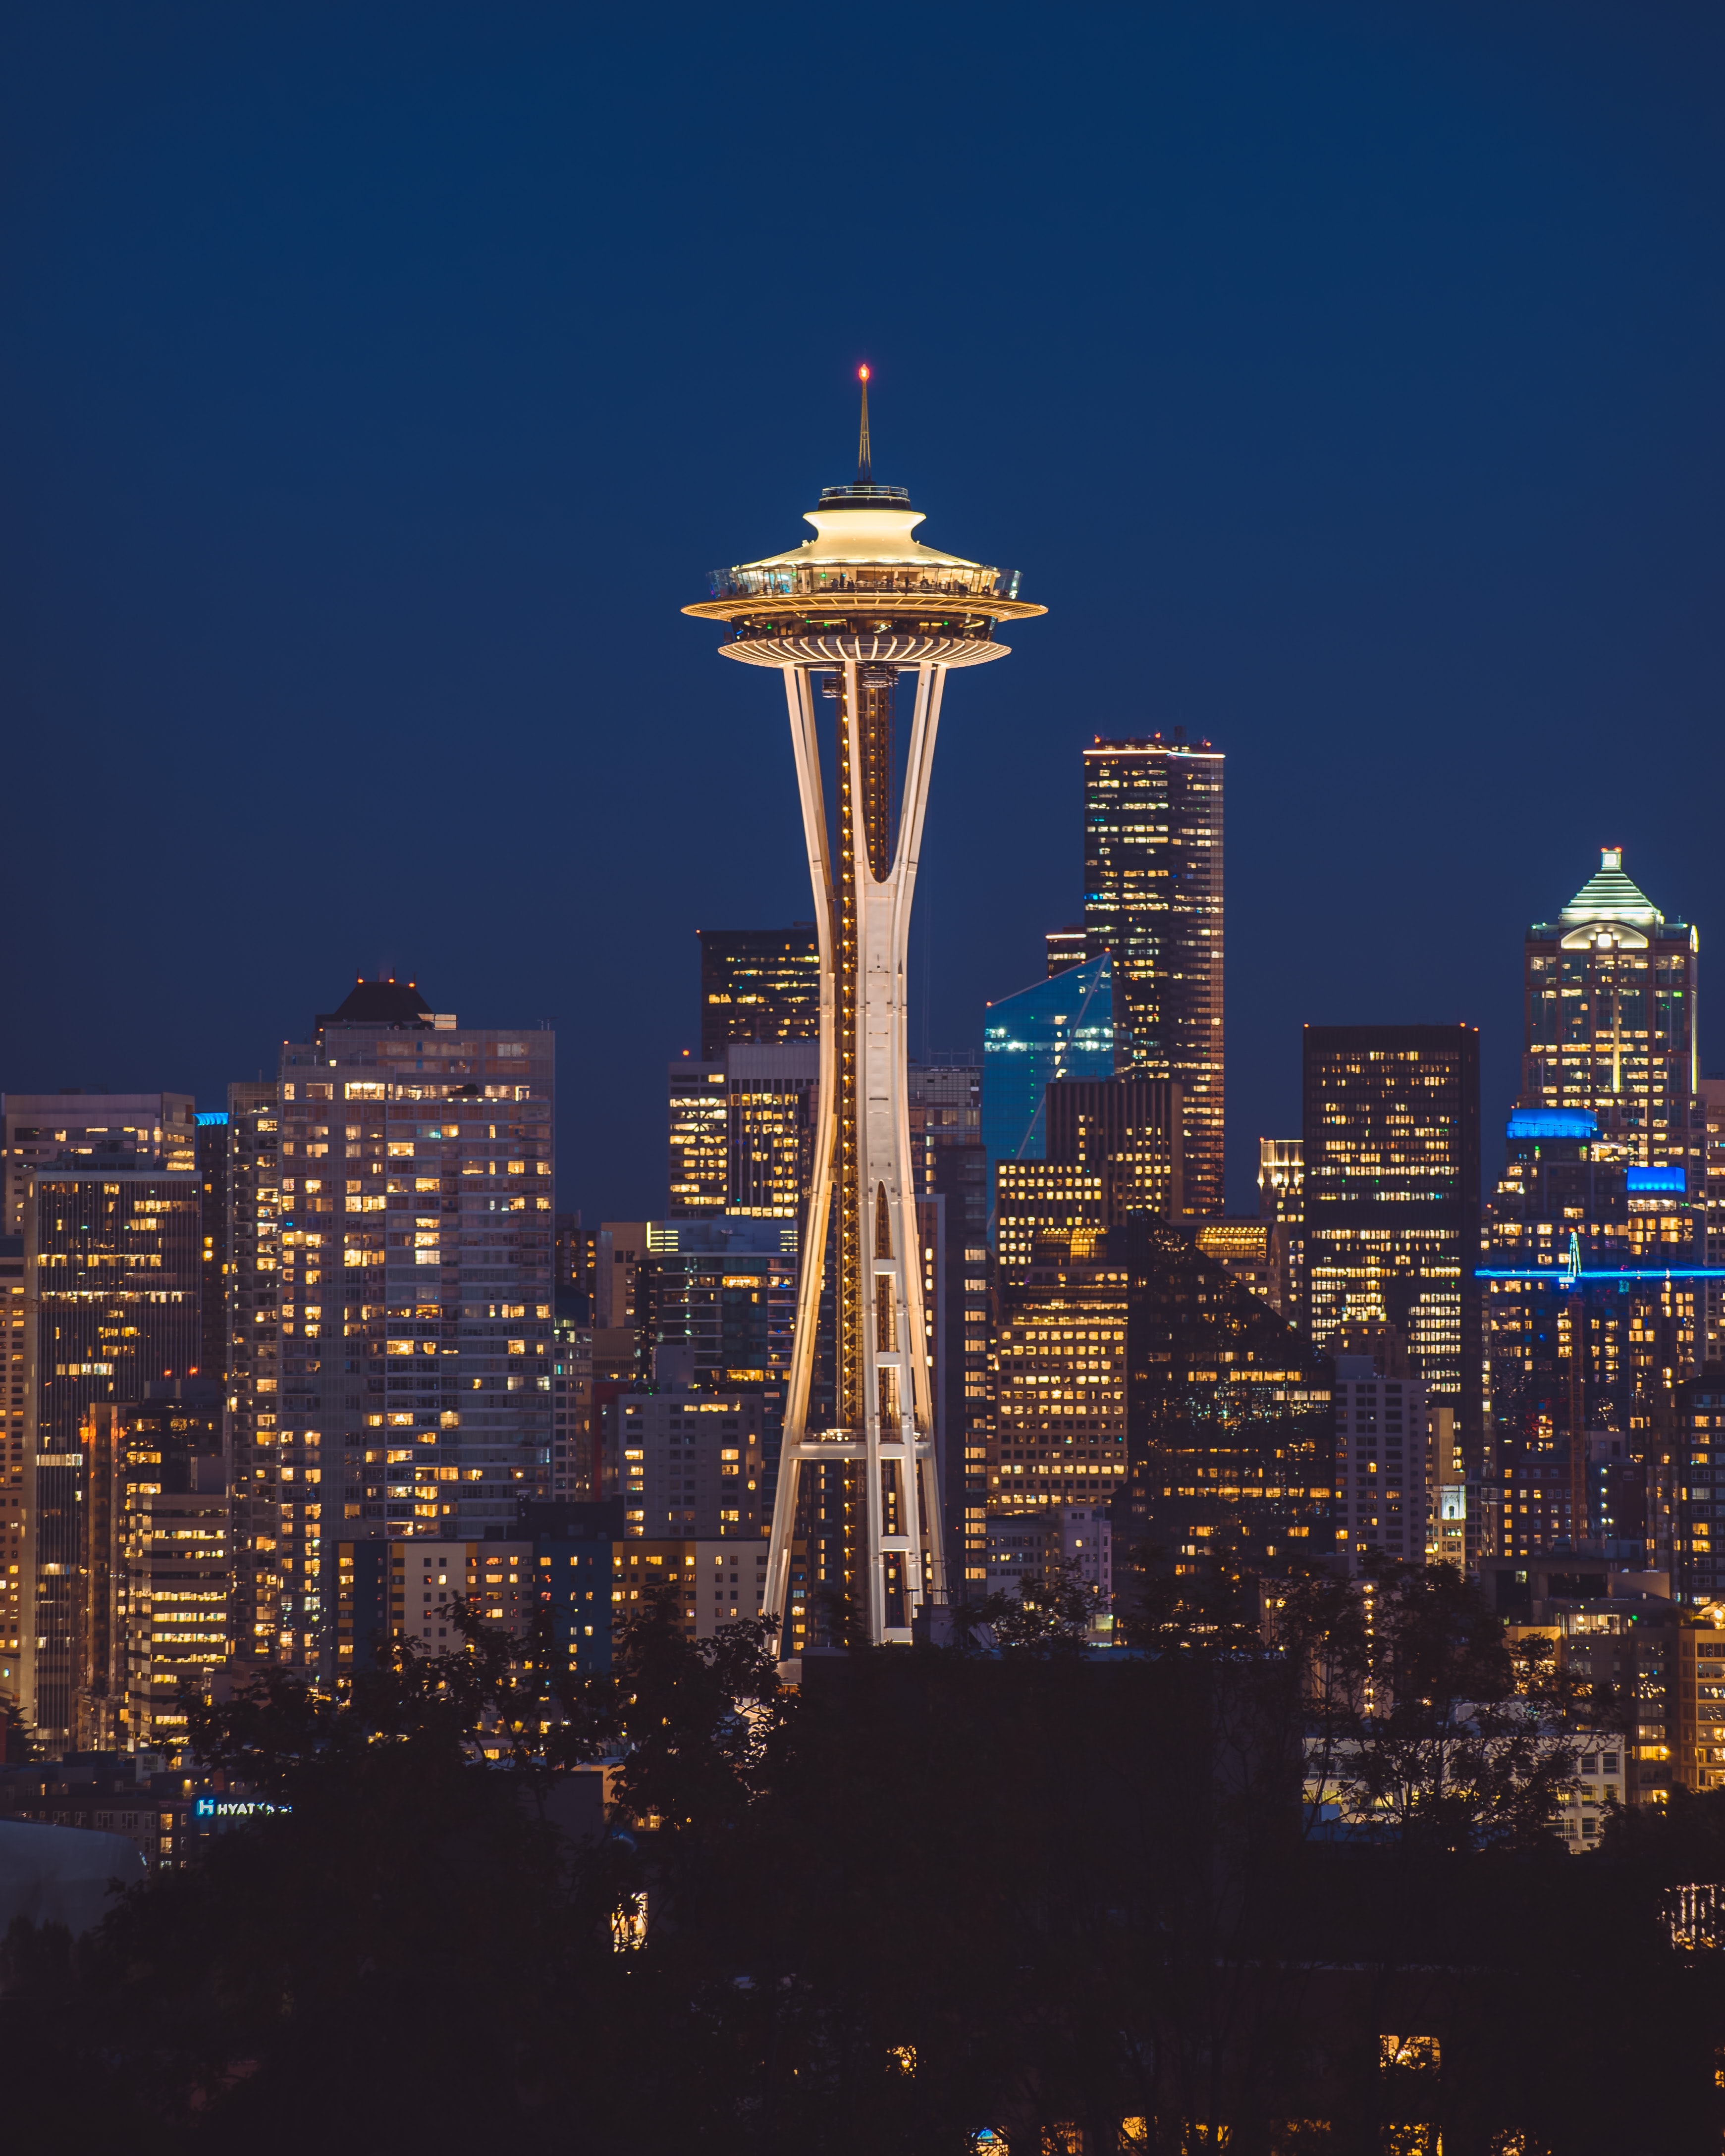 tower, night city, architecture, cities, usa, building, skyscrapers, united states, seattle High Definition image